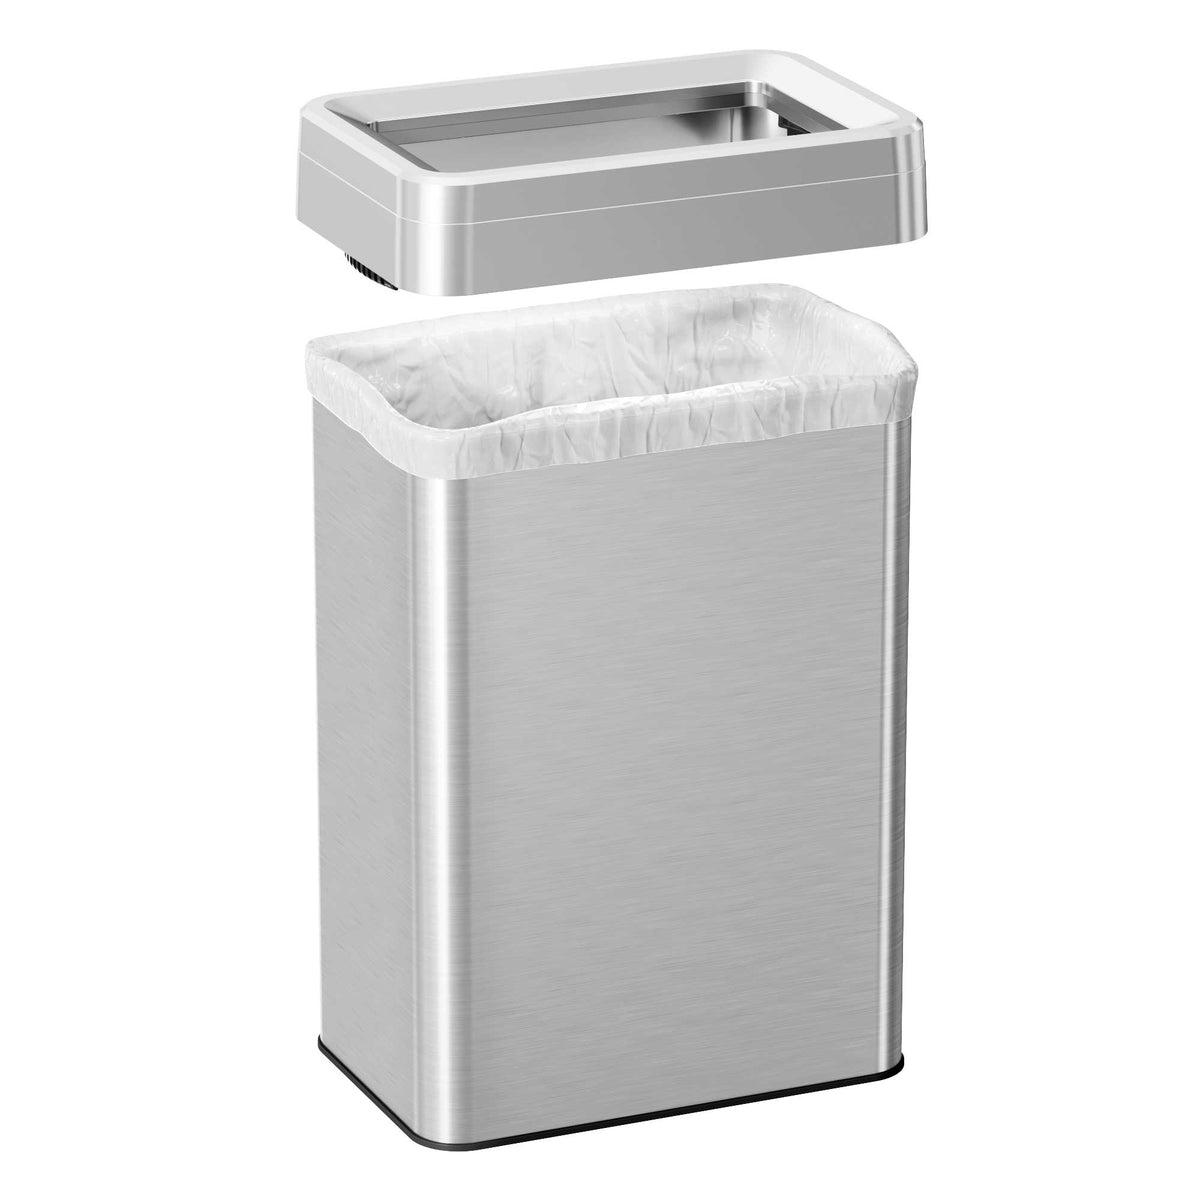 16 Gallon / 60 Liter Rectangular Open Top Trash Can with Wheels snug fit lid